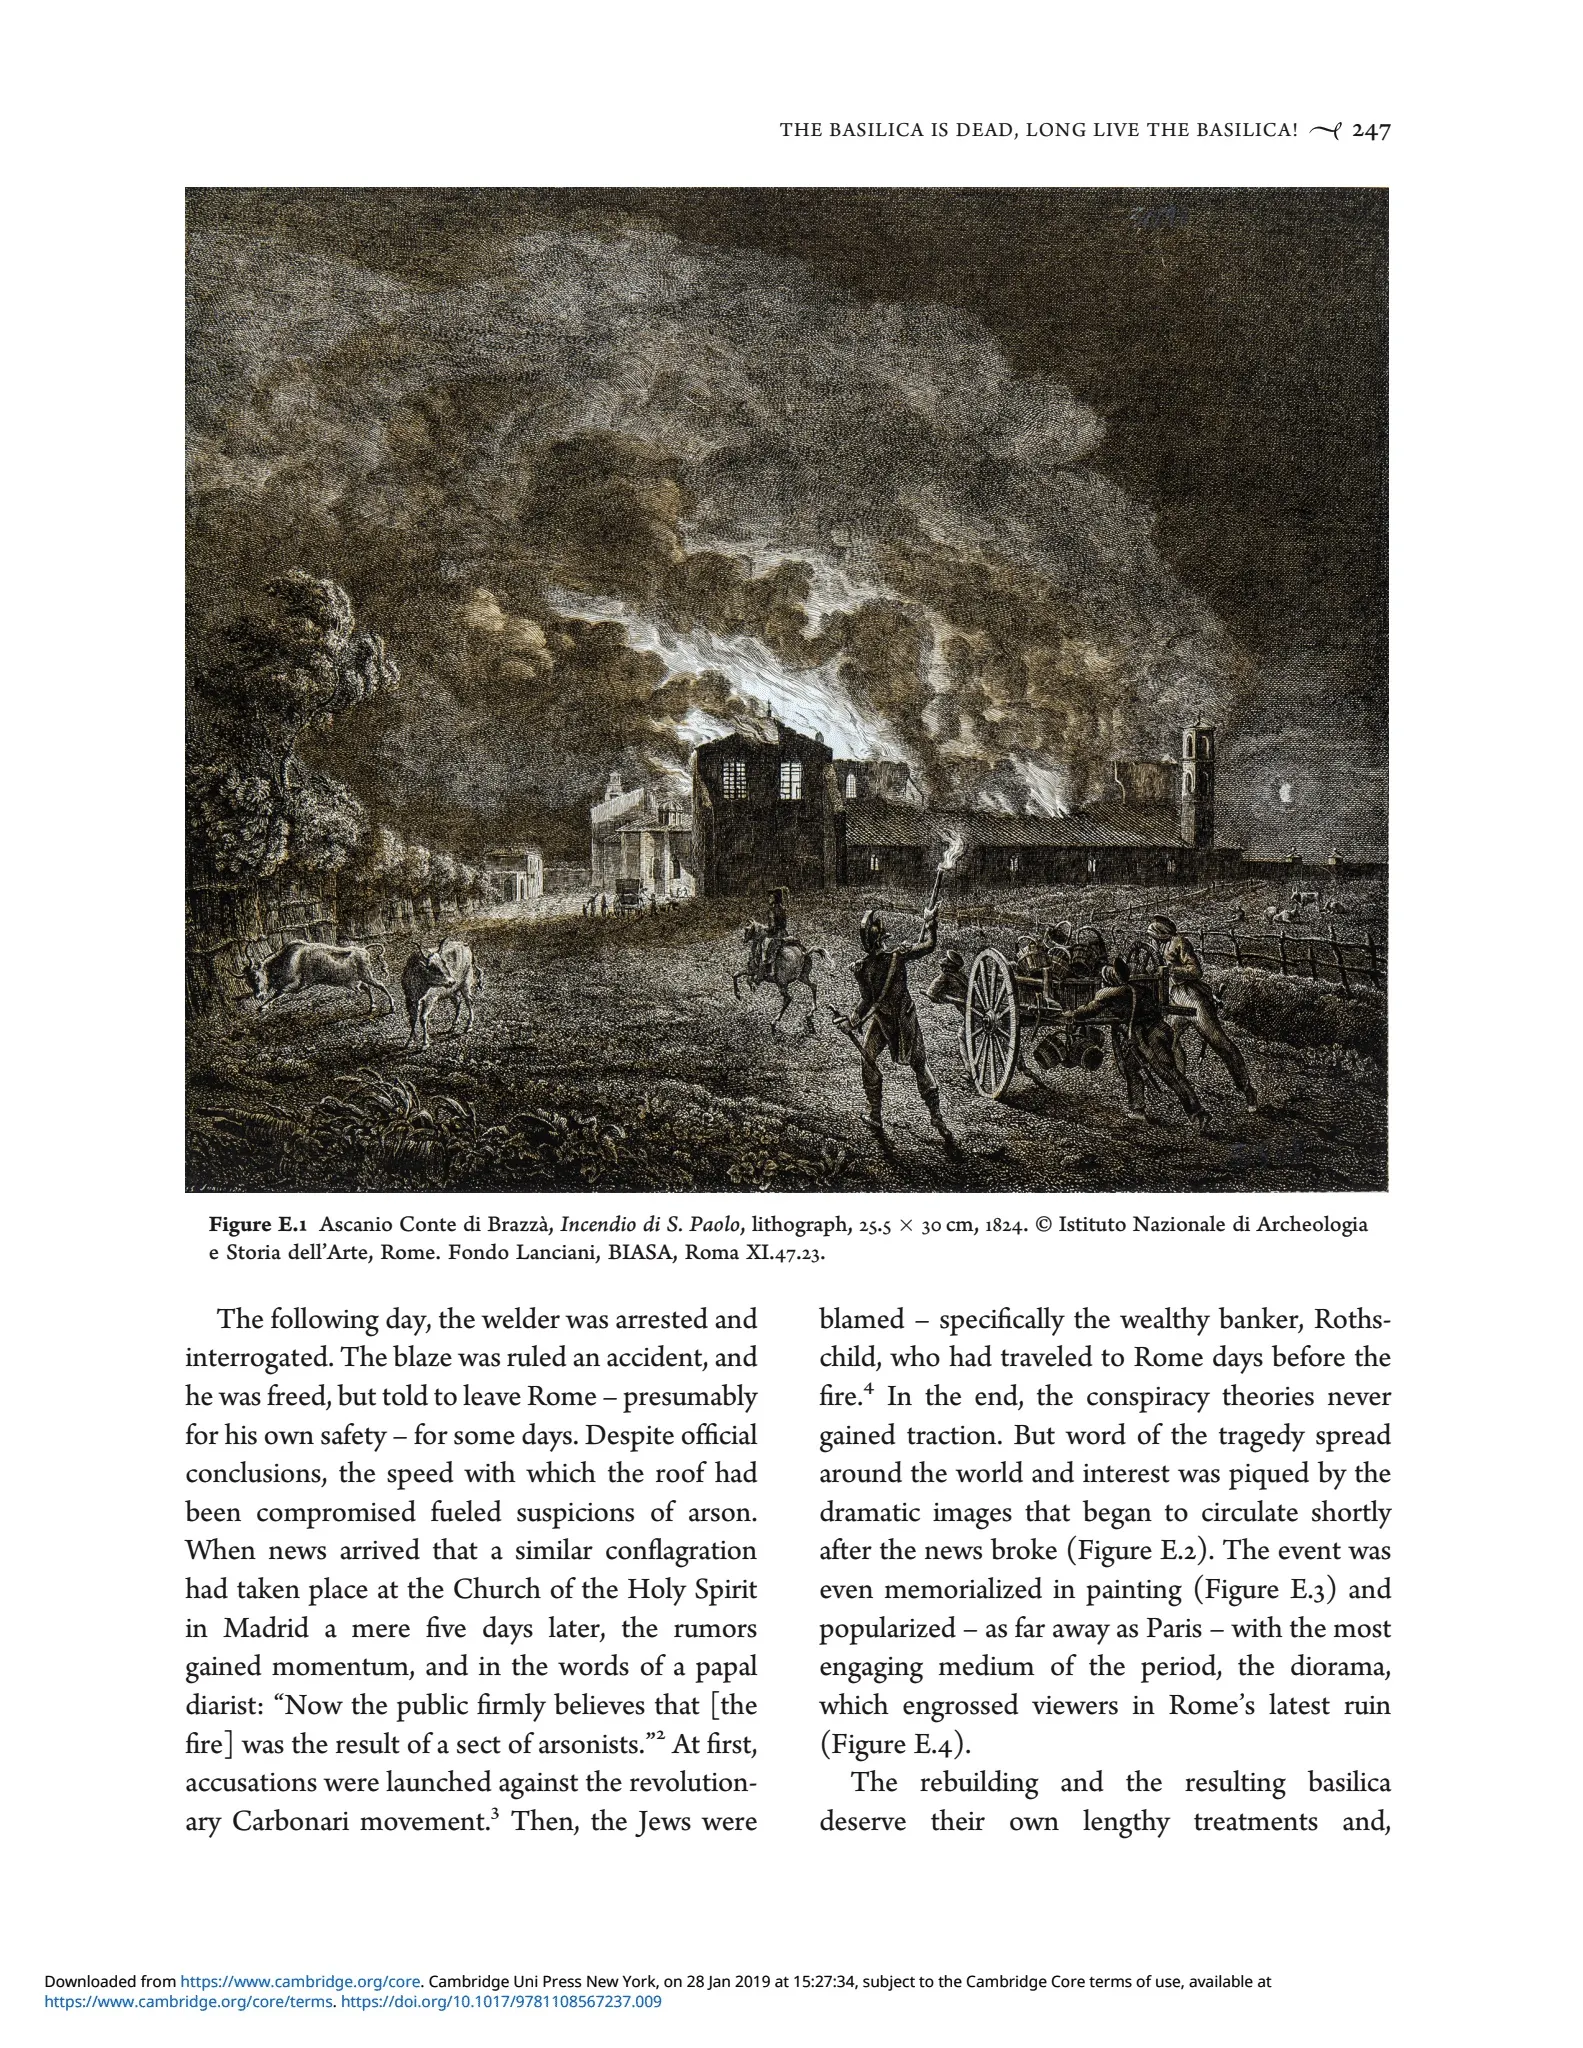 Lithograph image of fire at St. Paul Outside the Walls in Rome, 1823, depicted in "St. Paul's Outside the Walls, A Roman Basilica, from Antiquity to the Modern Era," by Professor Nicola Camerlenghi, 2018. Photo courtesy of Professor Nicola Camerlenghi from his book "St. Paul's Outside the Walls, A Roman Basilica, from Antiquity to the Modern Era," 2018